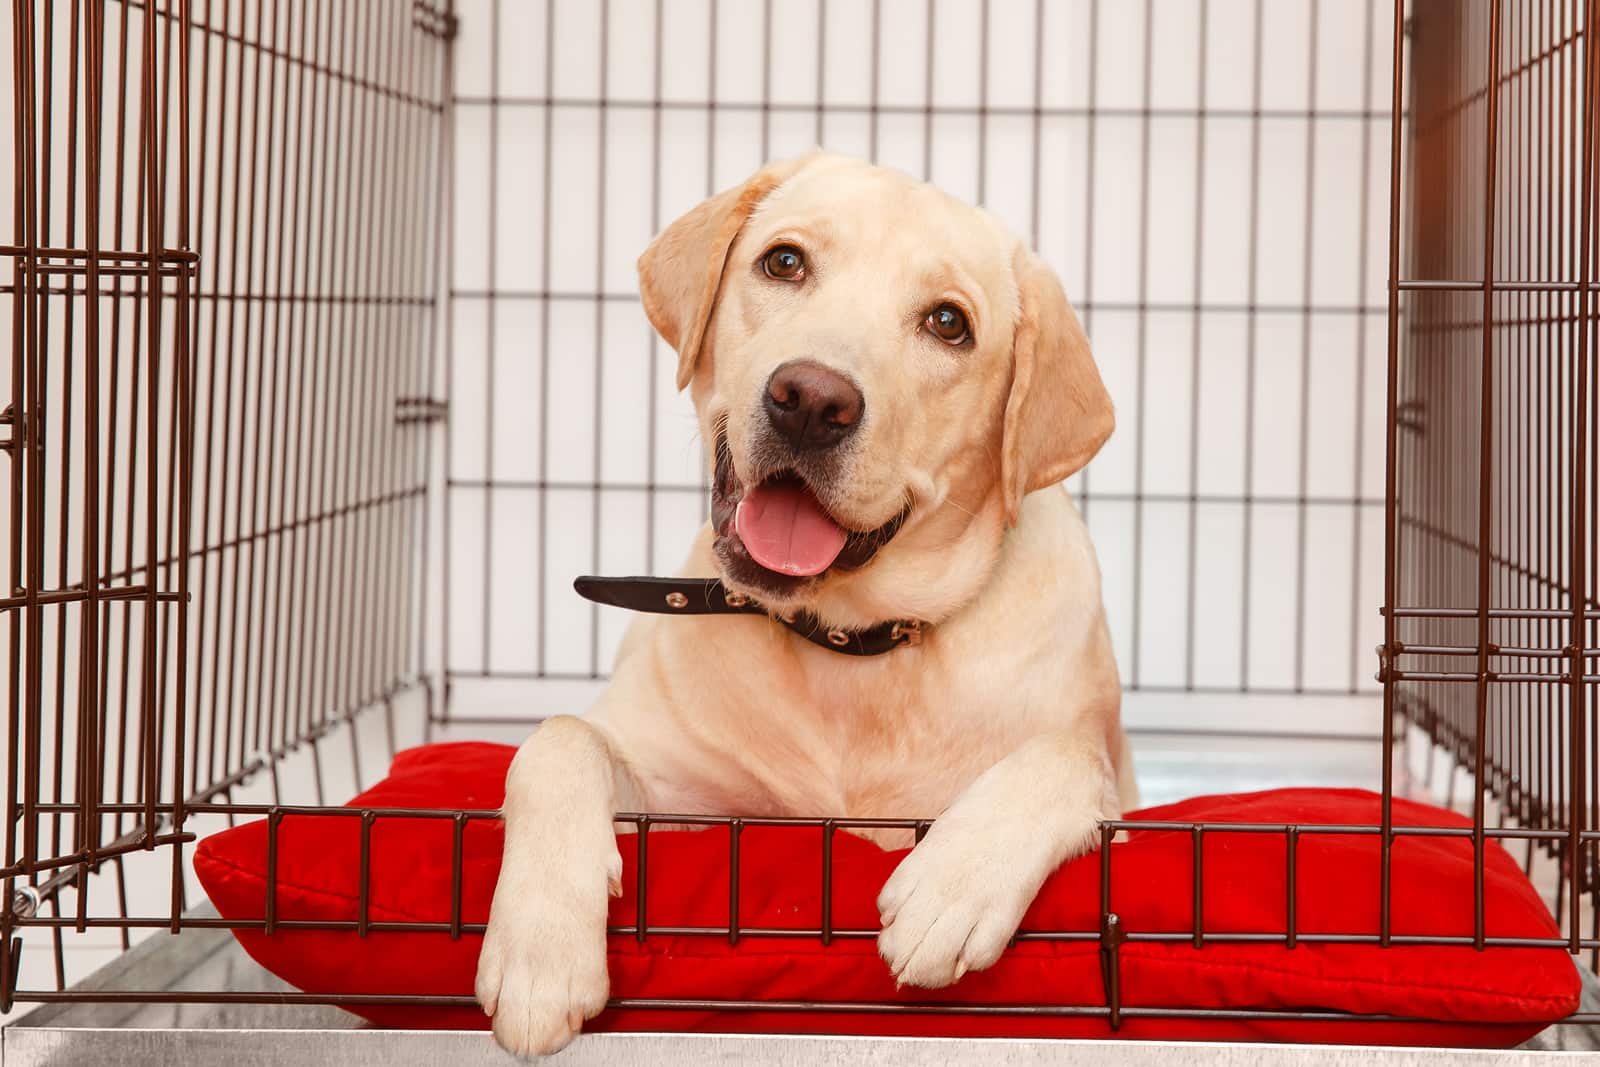 Will crate training help my puppy's separation anxiety? - Puppy Fever Pro